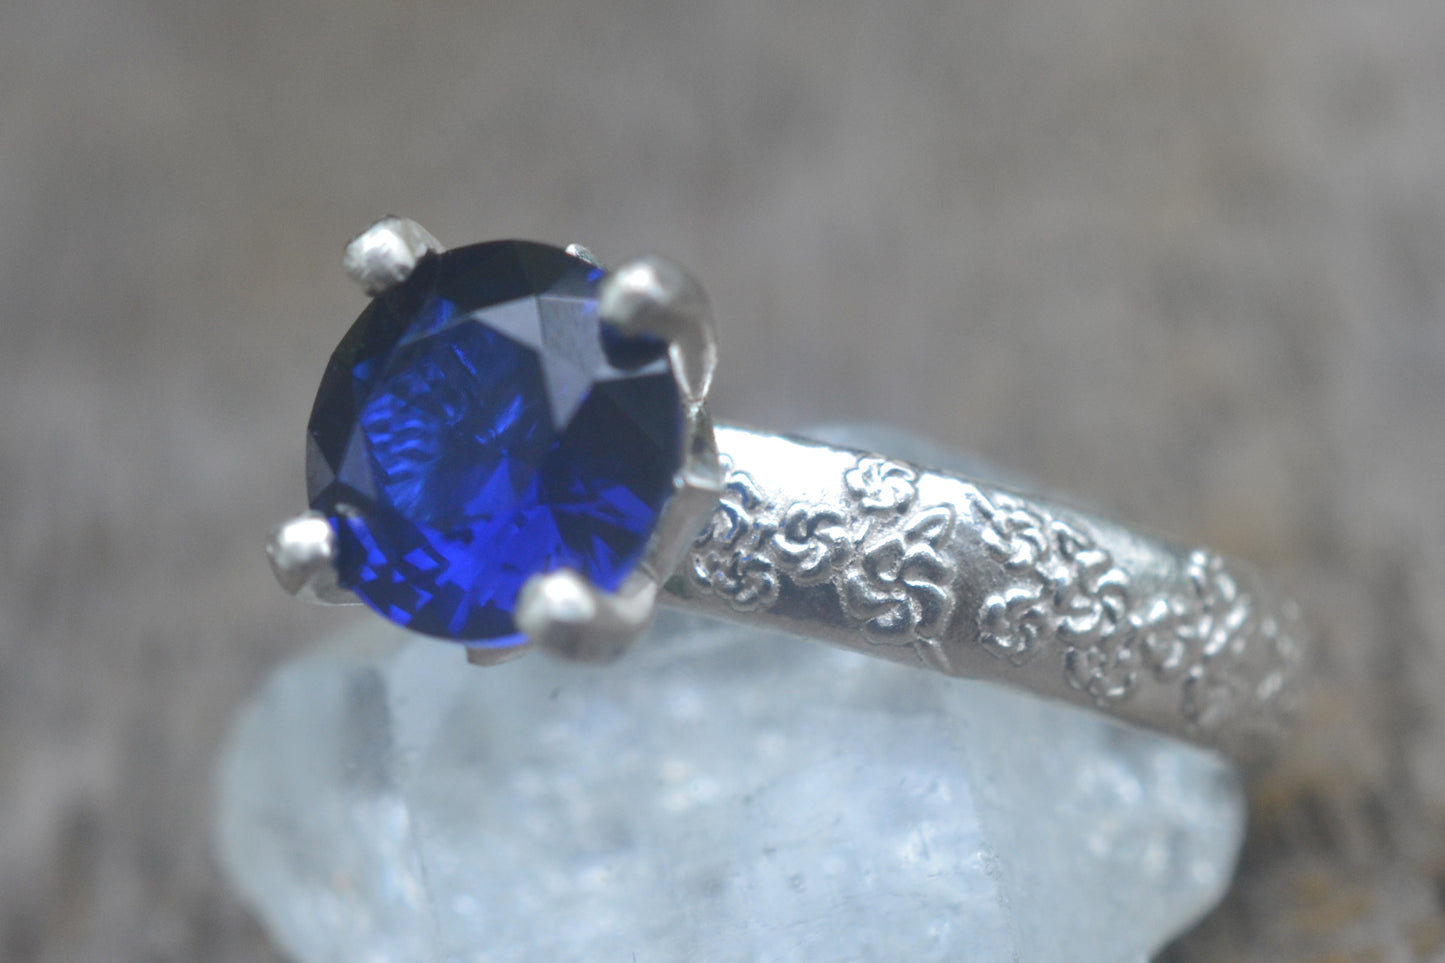 Faceted Blue Sapphire Ring with Blossom Design